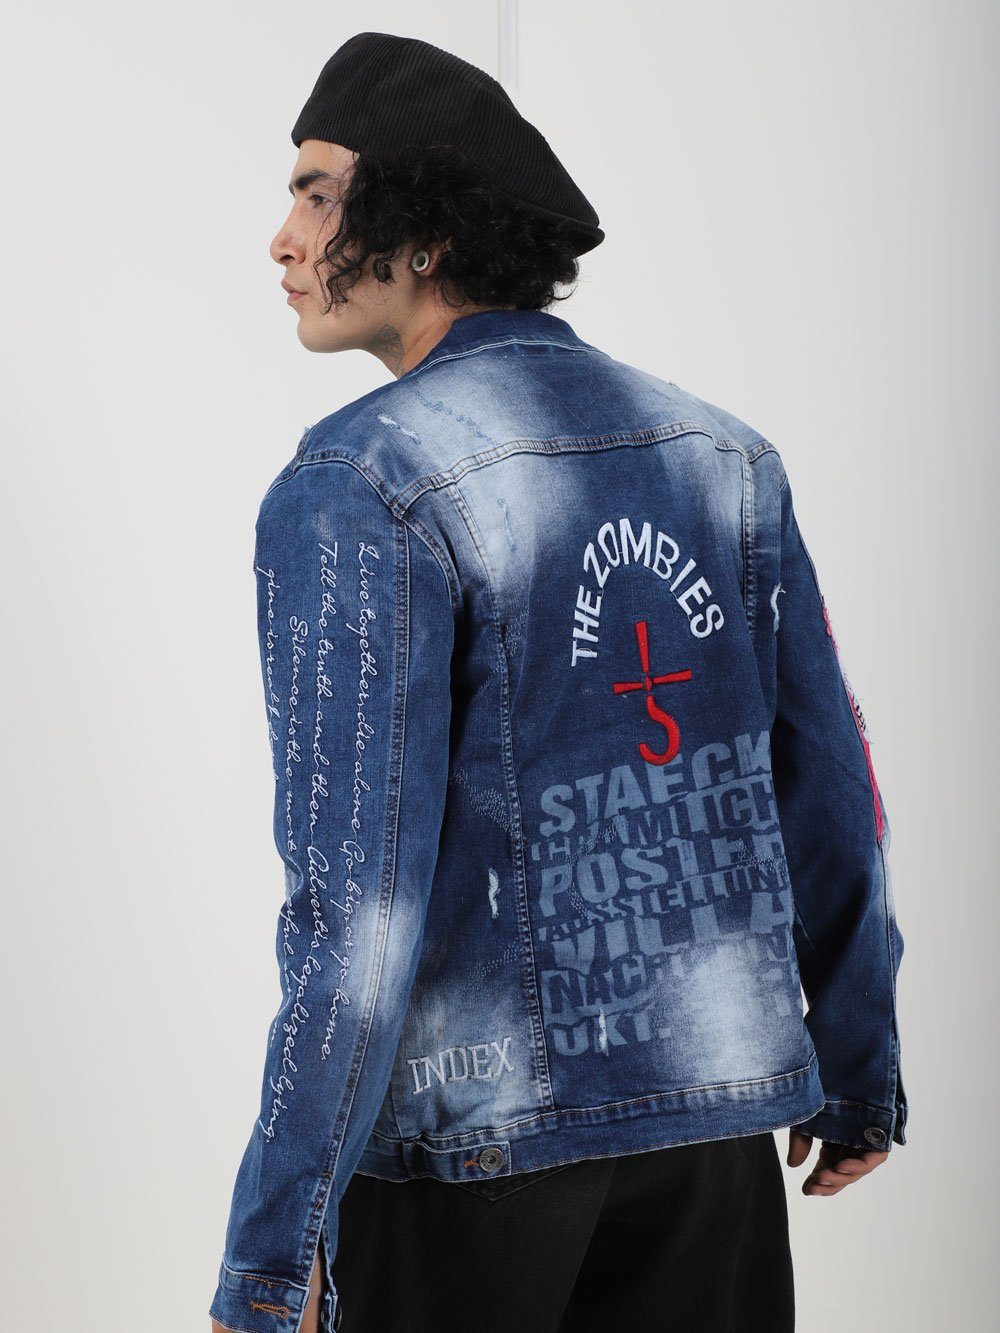 A man wearing THE VETERAN denim jacket with writing on it.